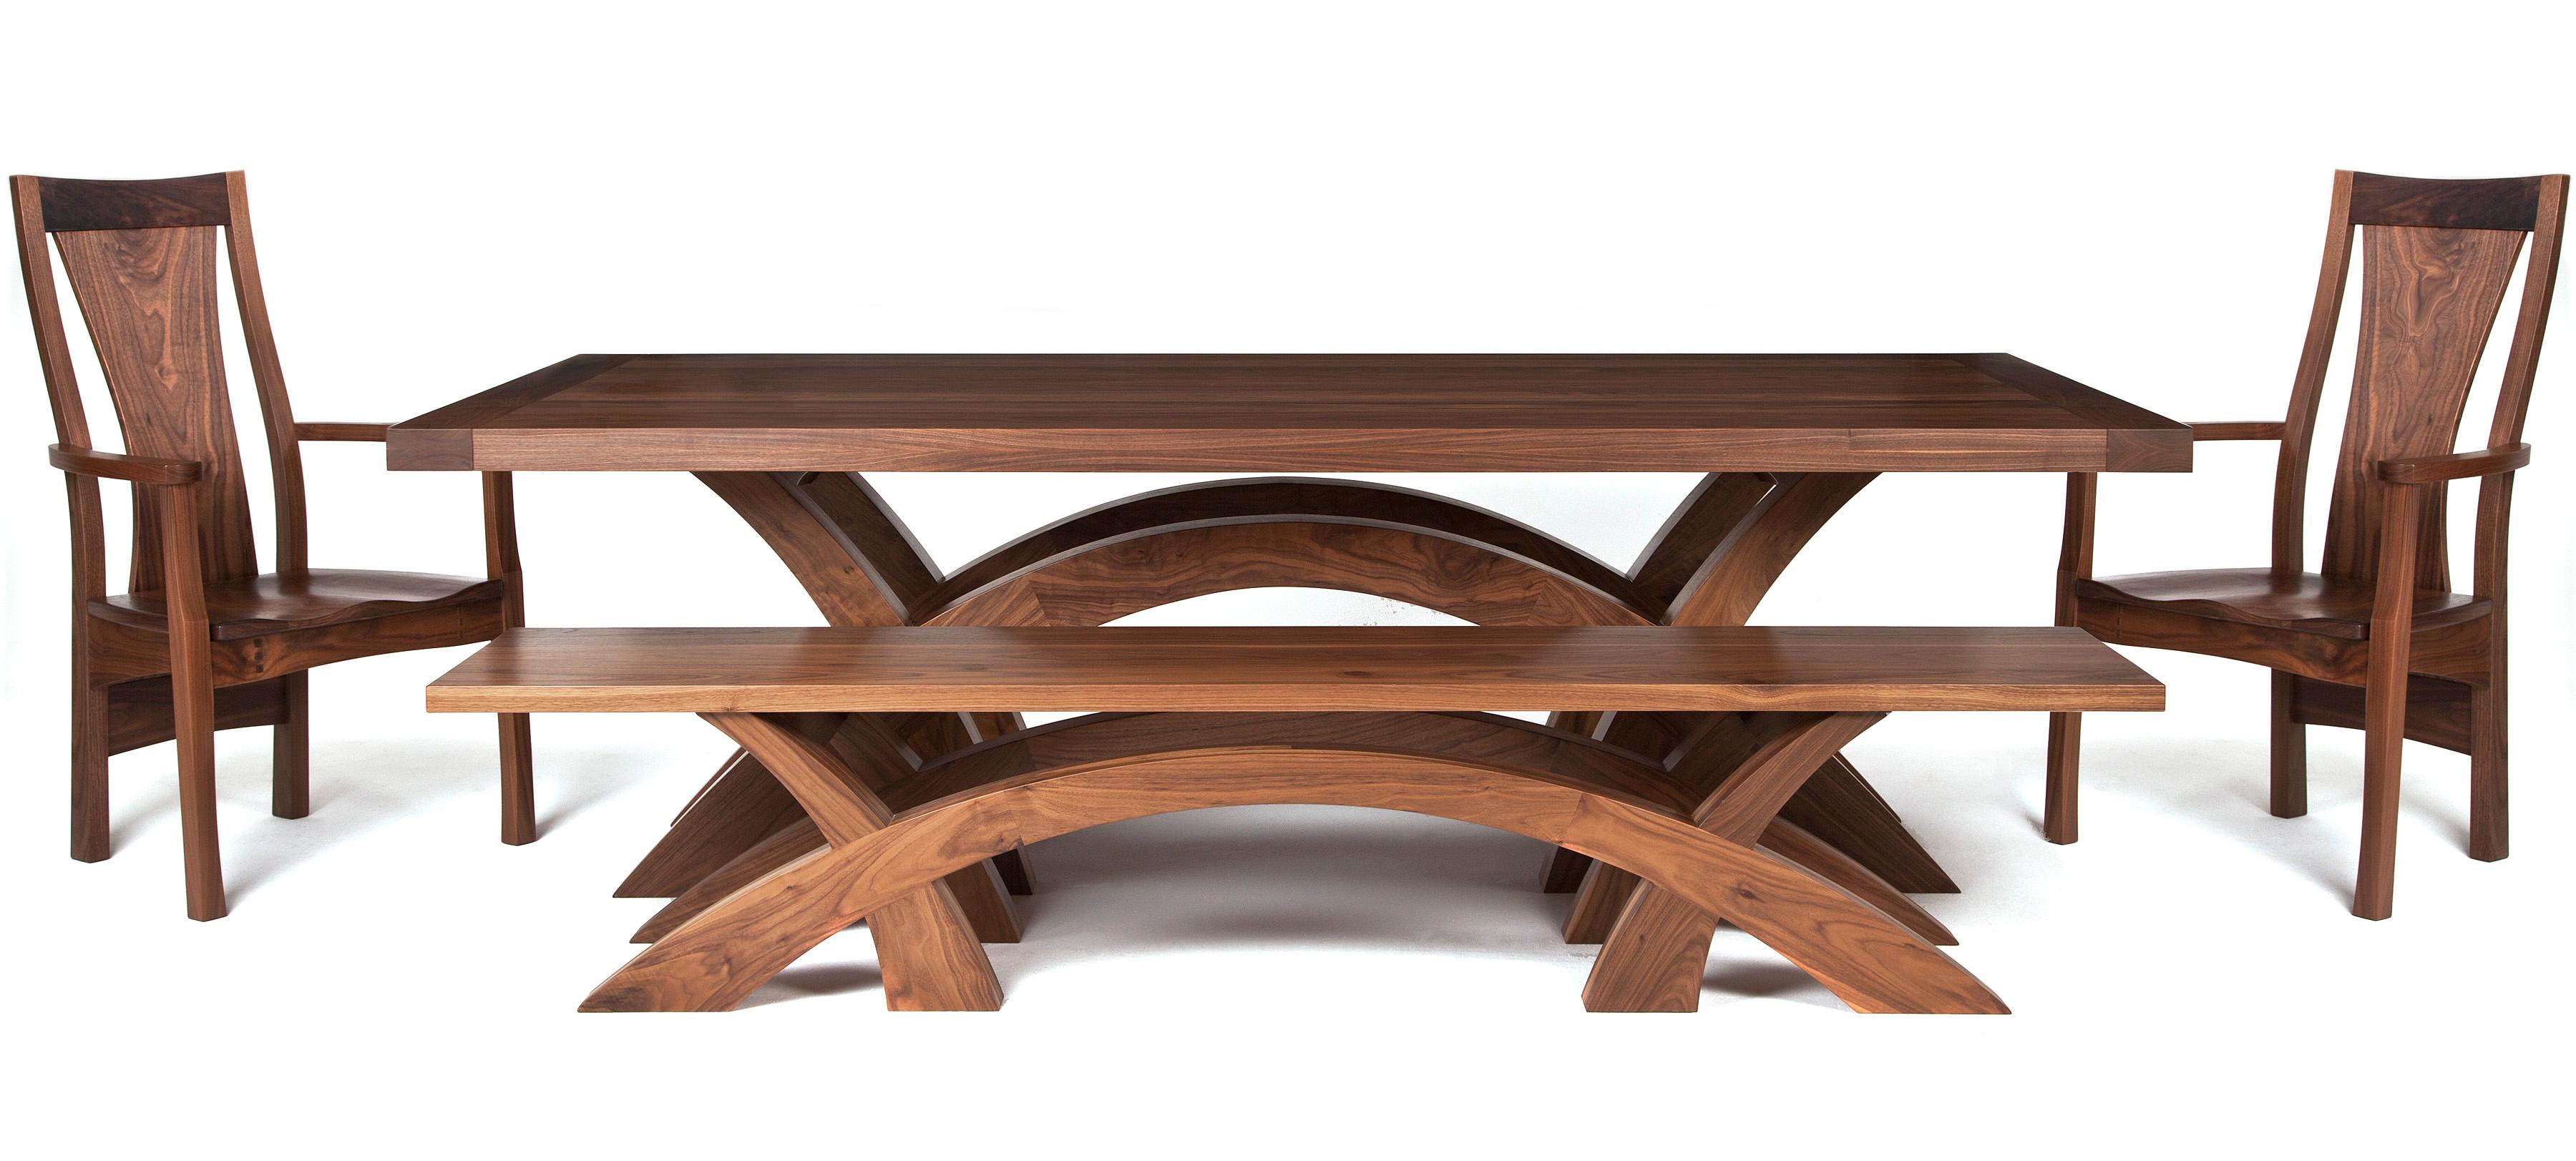 solid oak dining table